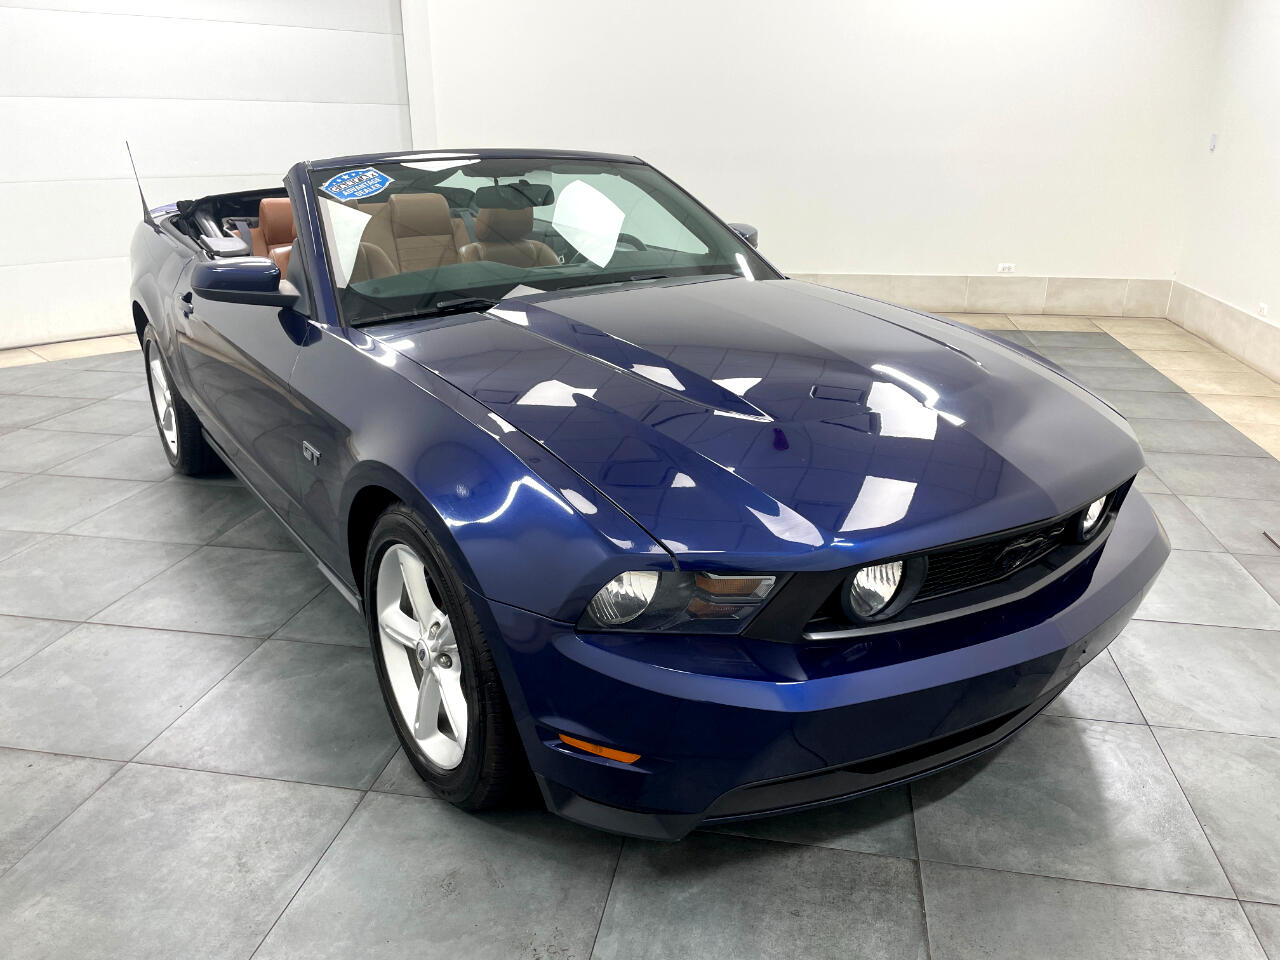 Ford Mustang GT convertible 2010